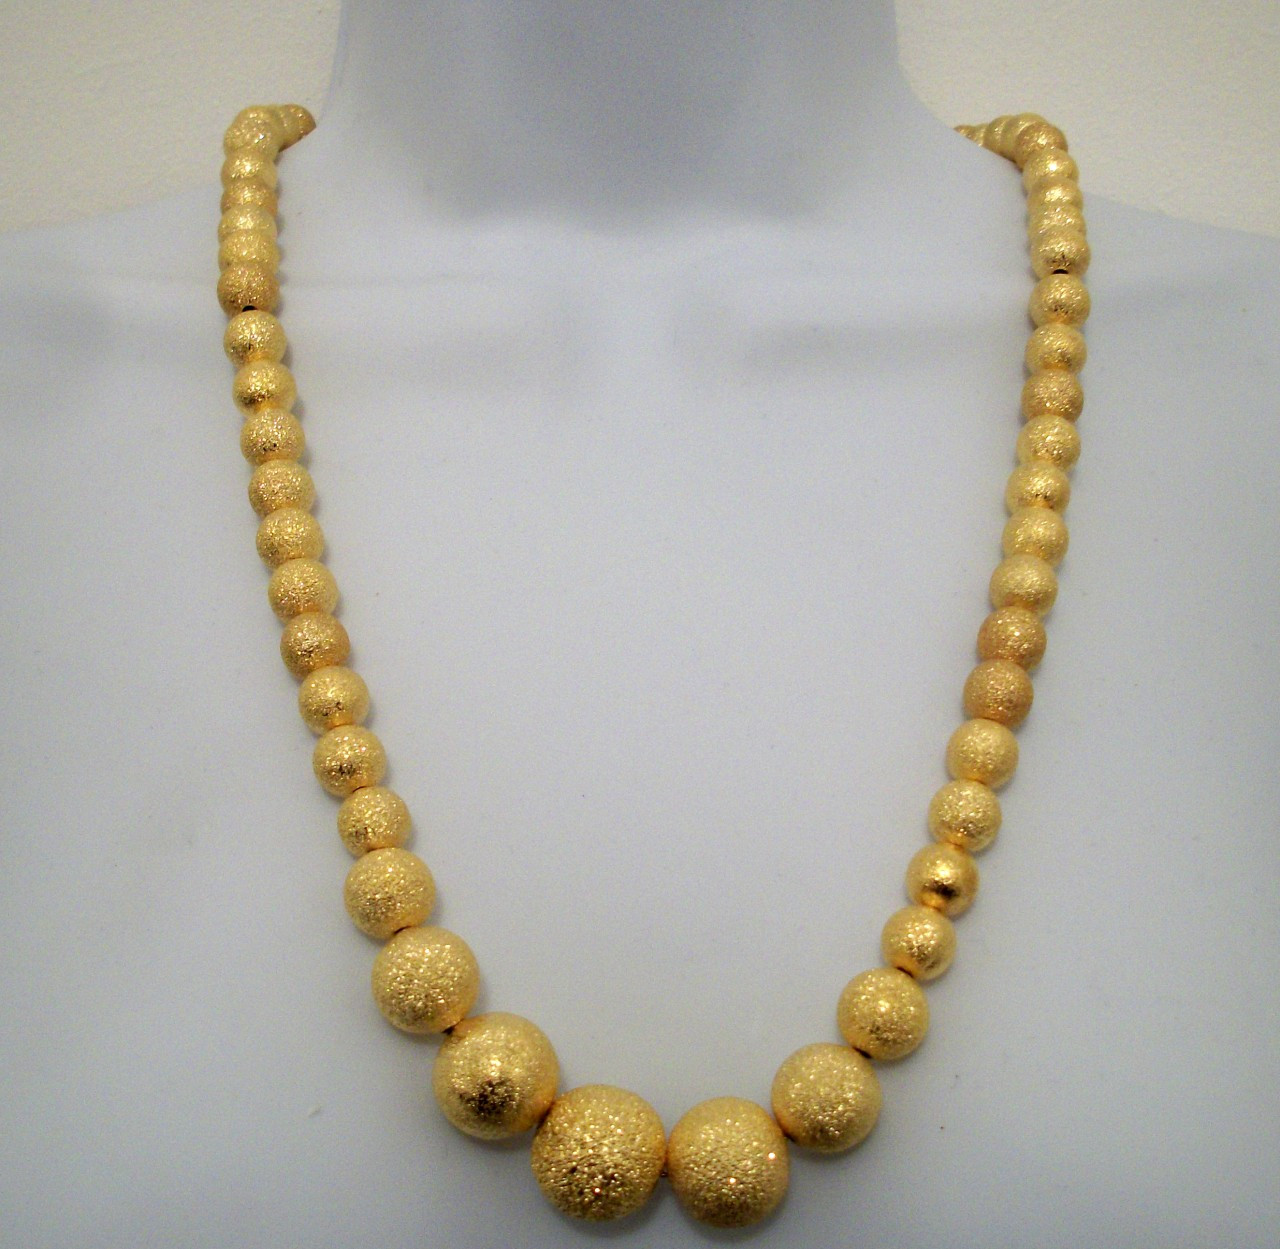 Antique Finish Gold Plated Ball Chain Mala Necklace Earring Set Gift | eBay